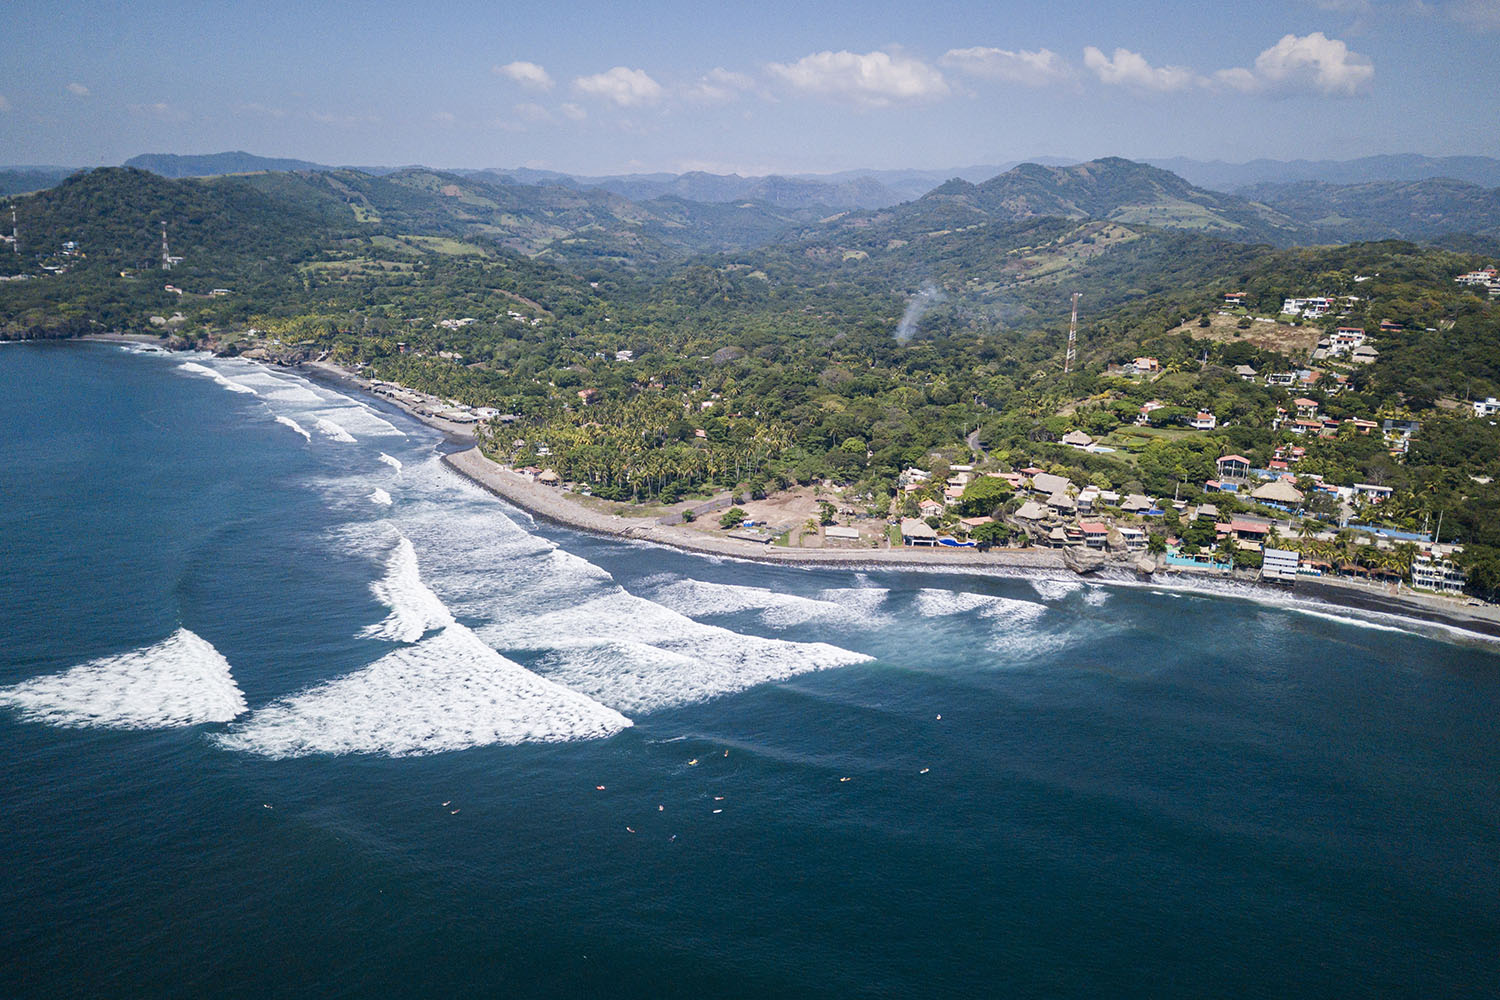 El Sunzal and La Bocana in El Salvador is known as Surf City and has become a regular venue for major ISA events, having hosted the World Surfing Games in 2021 ©ISA